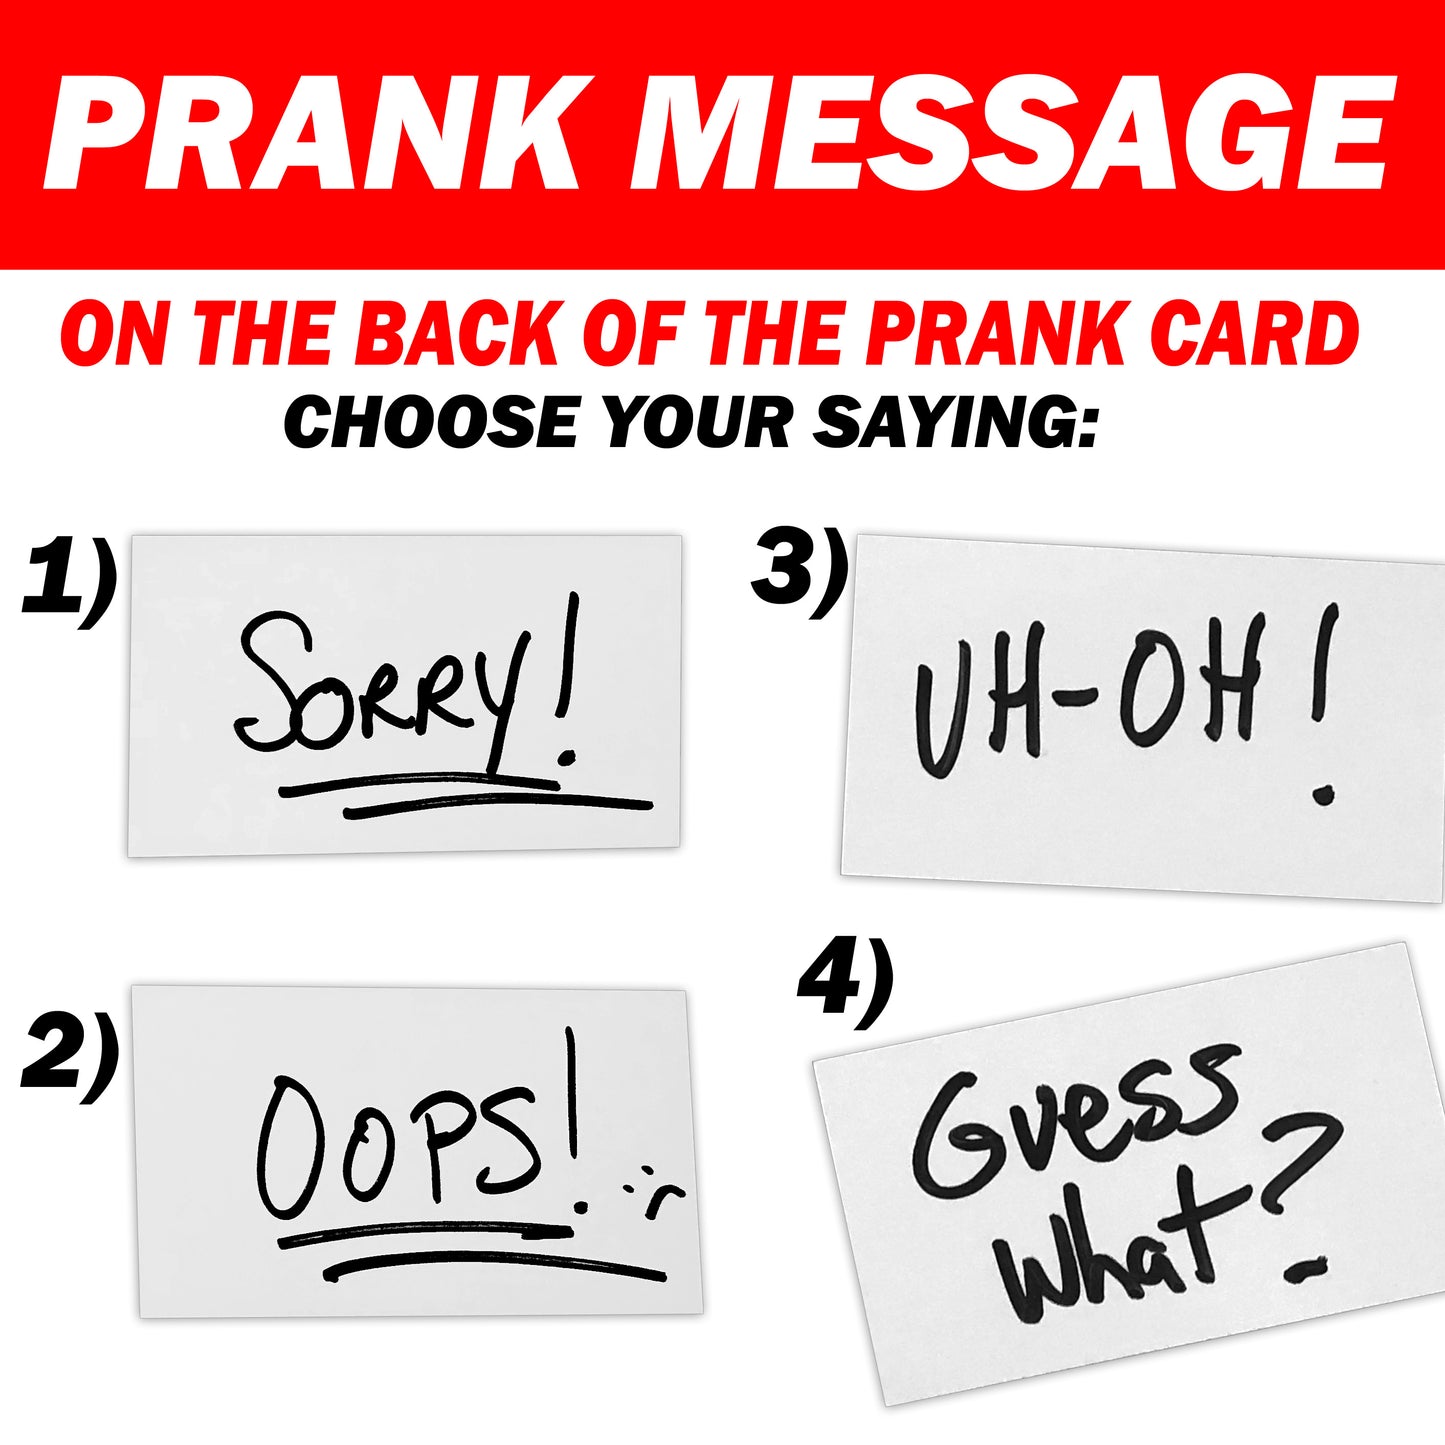 Fake Pregnancy Test Prank – See Thru Prank Mailed Directly To The Victim 100% Anonymously!